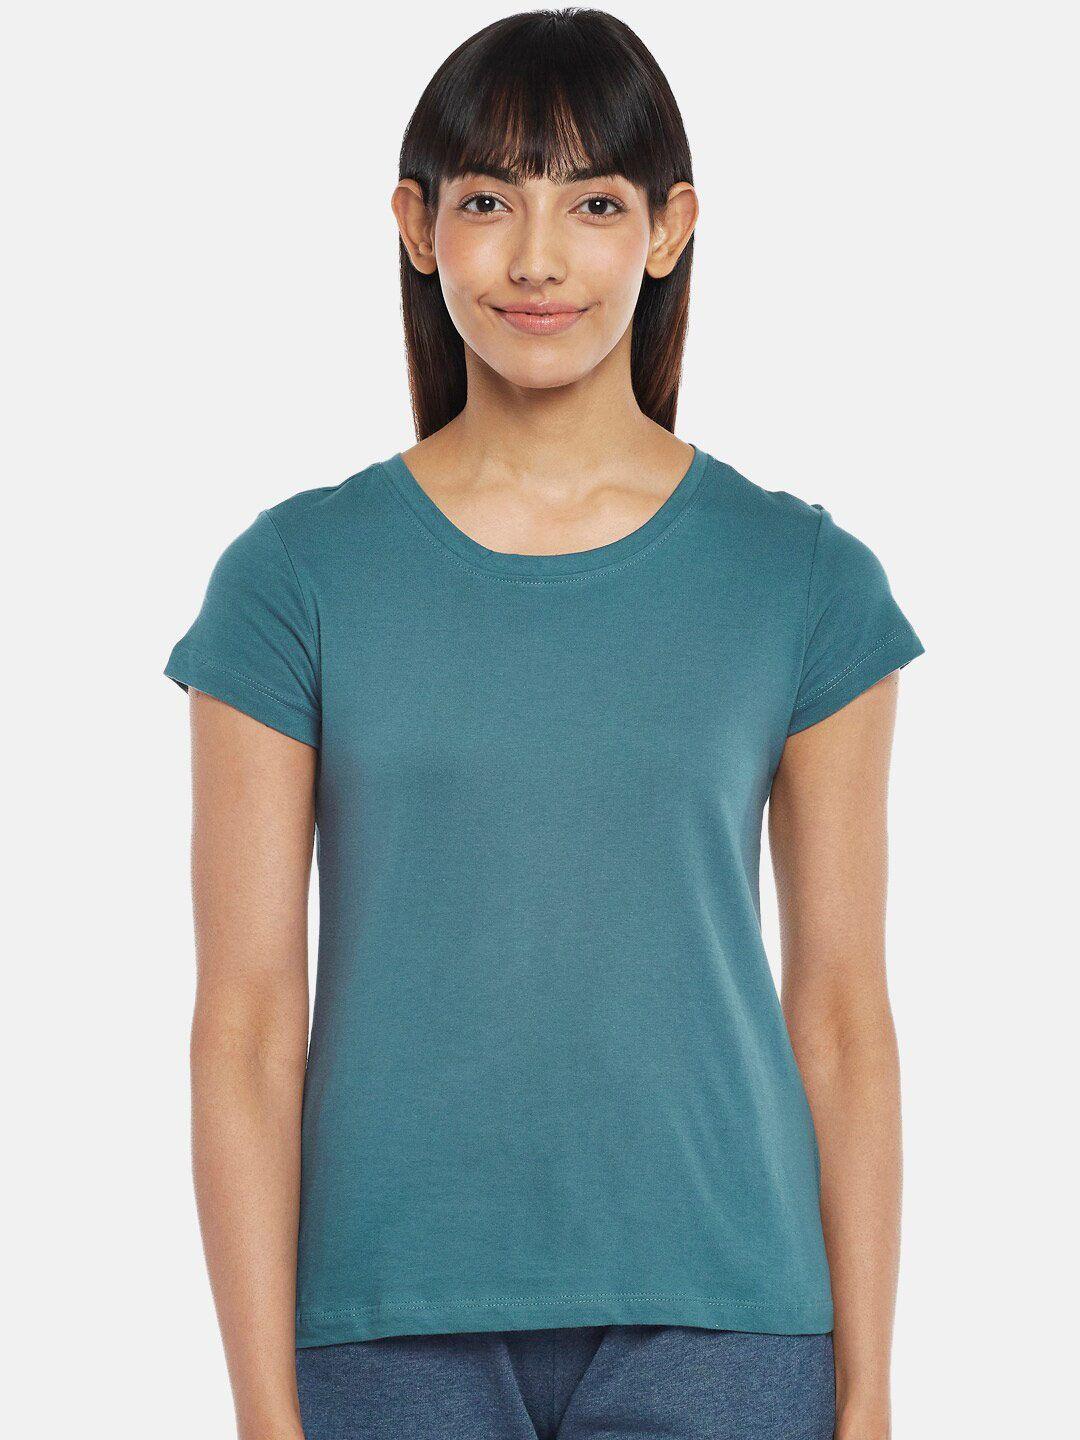 dreamz by pantaloons women round neck teal top